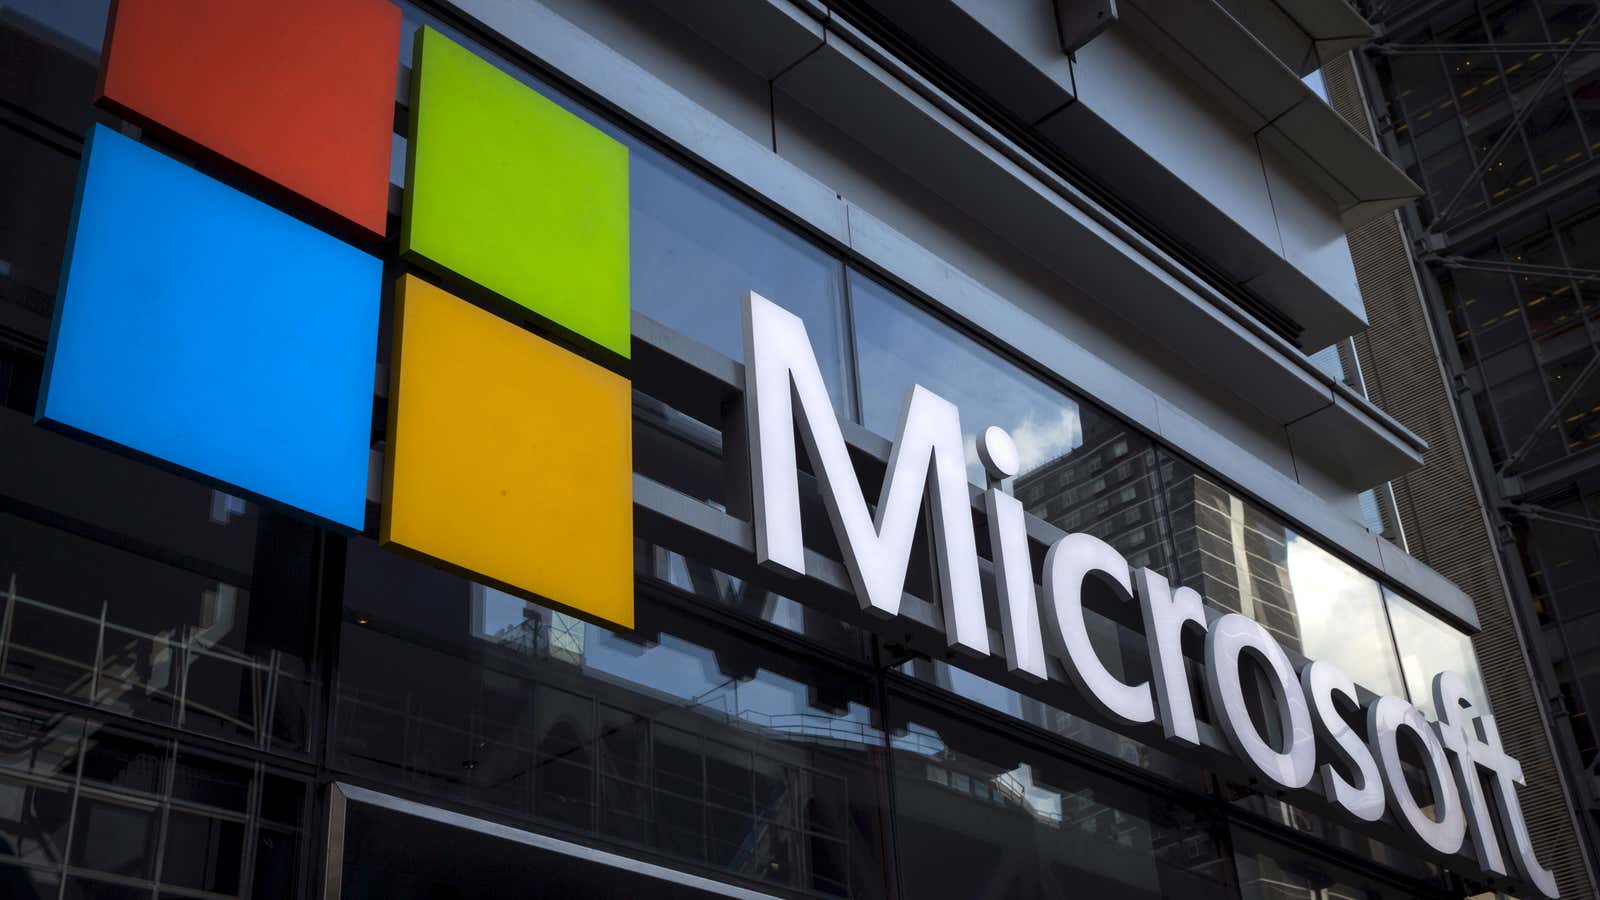 Microsoft’s $19.2 billion acquisition of Nuance Communications is one of the biggest deals of the year so far.